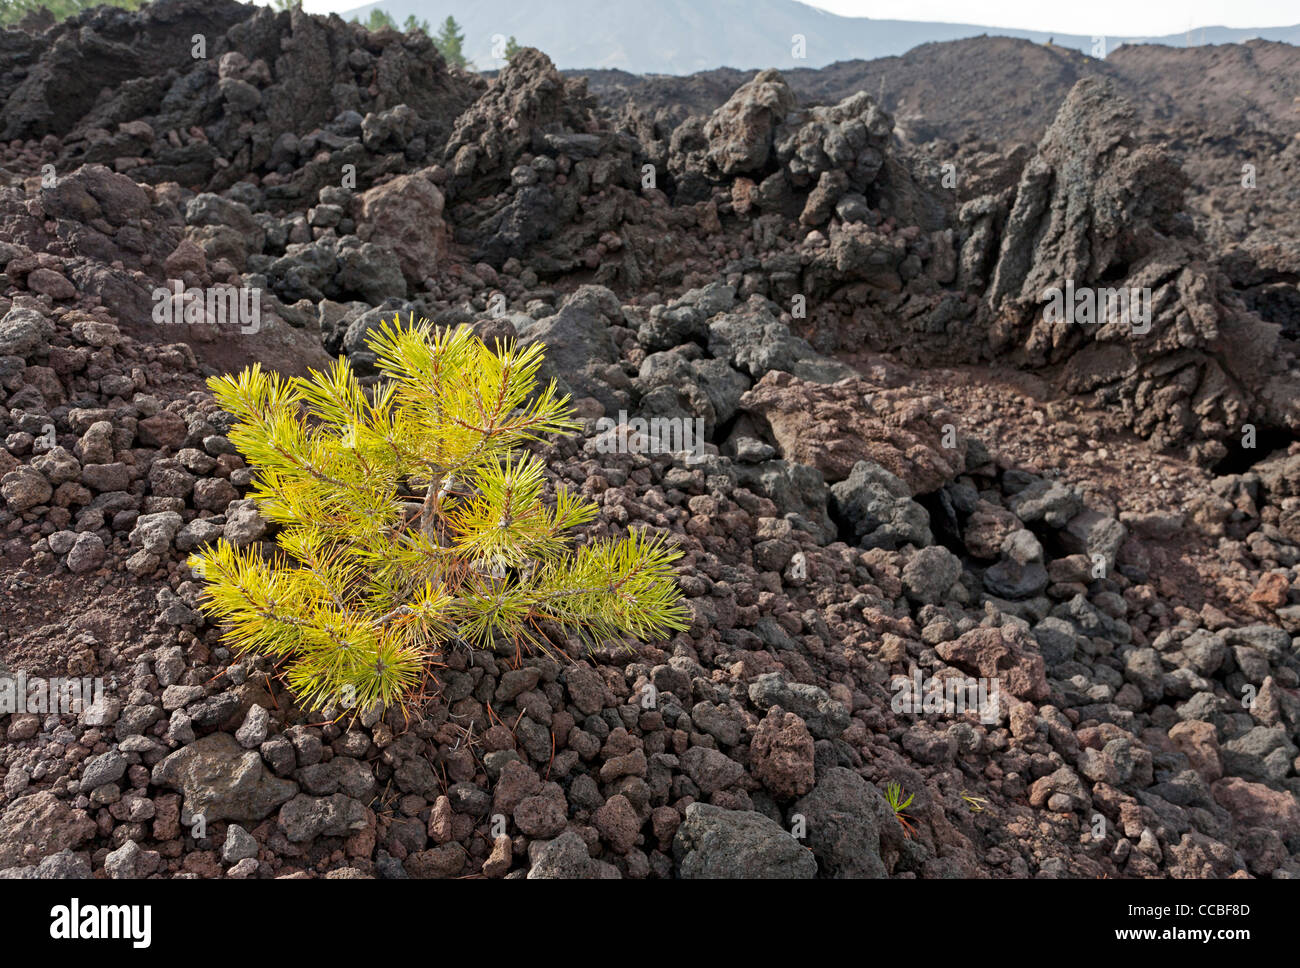 Young tree in stream of lava Stock Photo